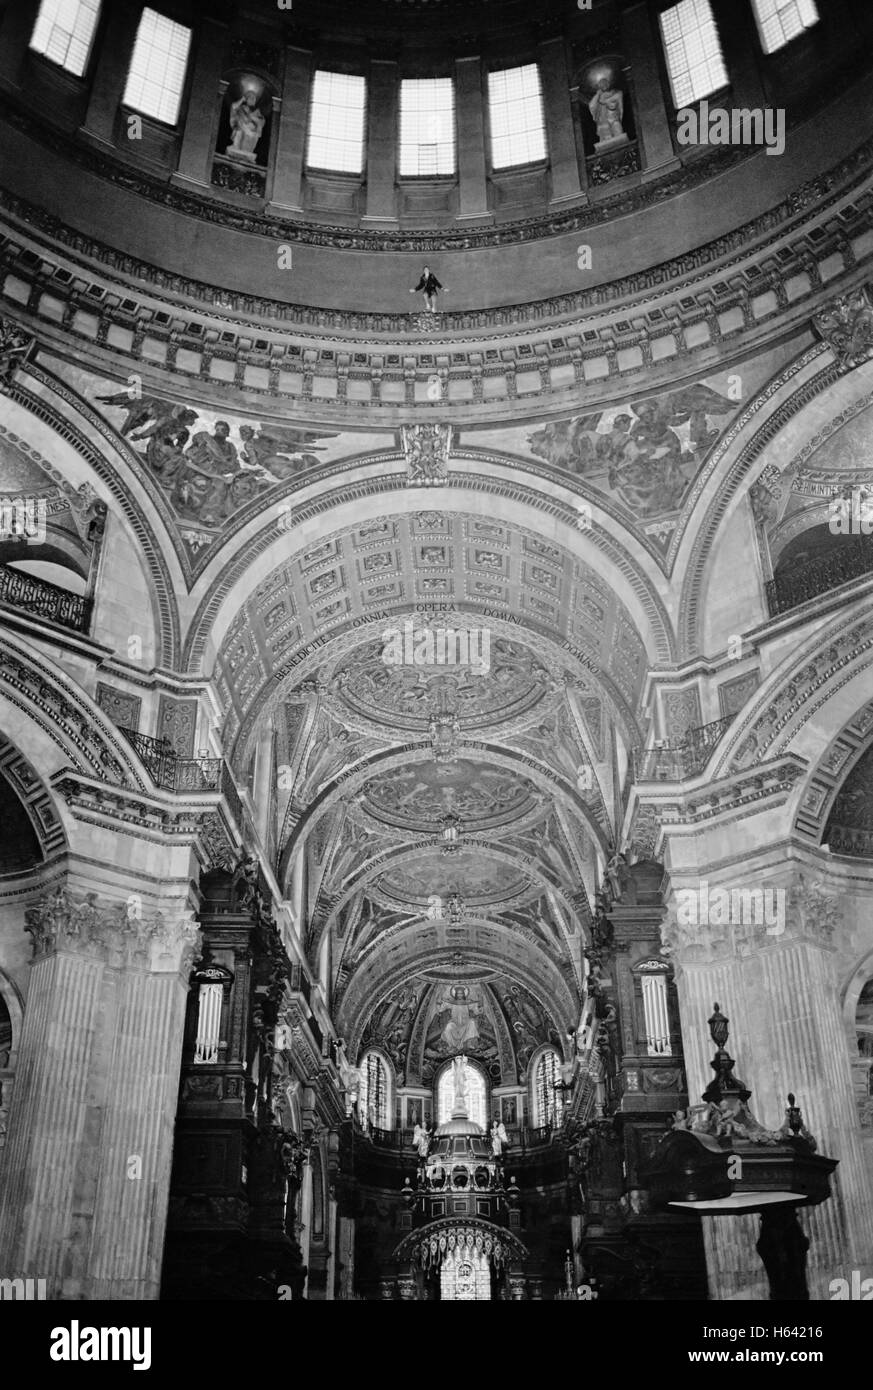 Russell Powell BASE 230 BASE Jumping from the Whispering Gallery inside St Pauls' Cathedral London. Picture copyright Doug Blane Stock Photo